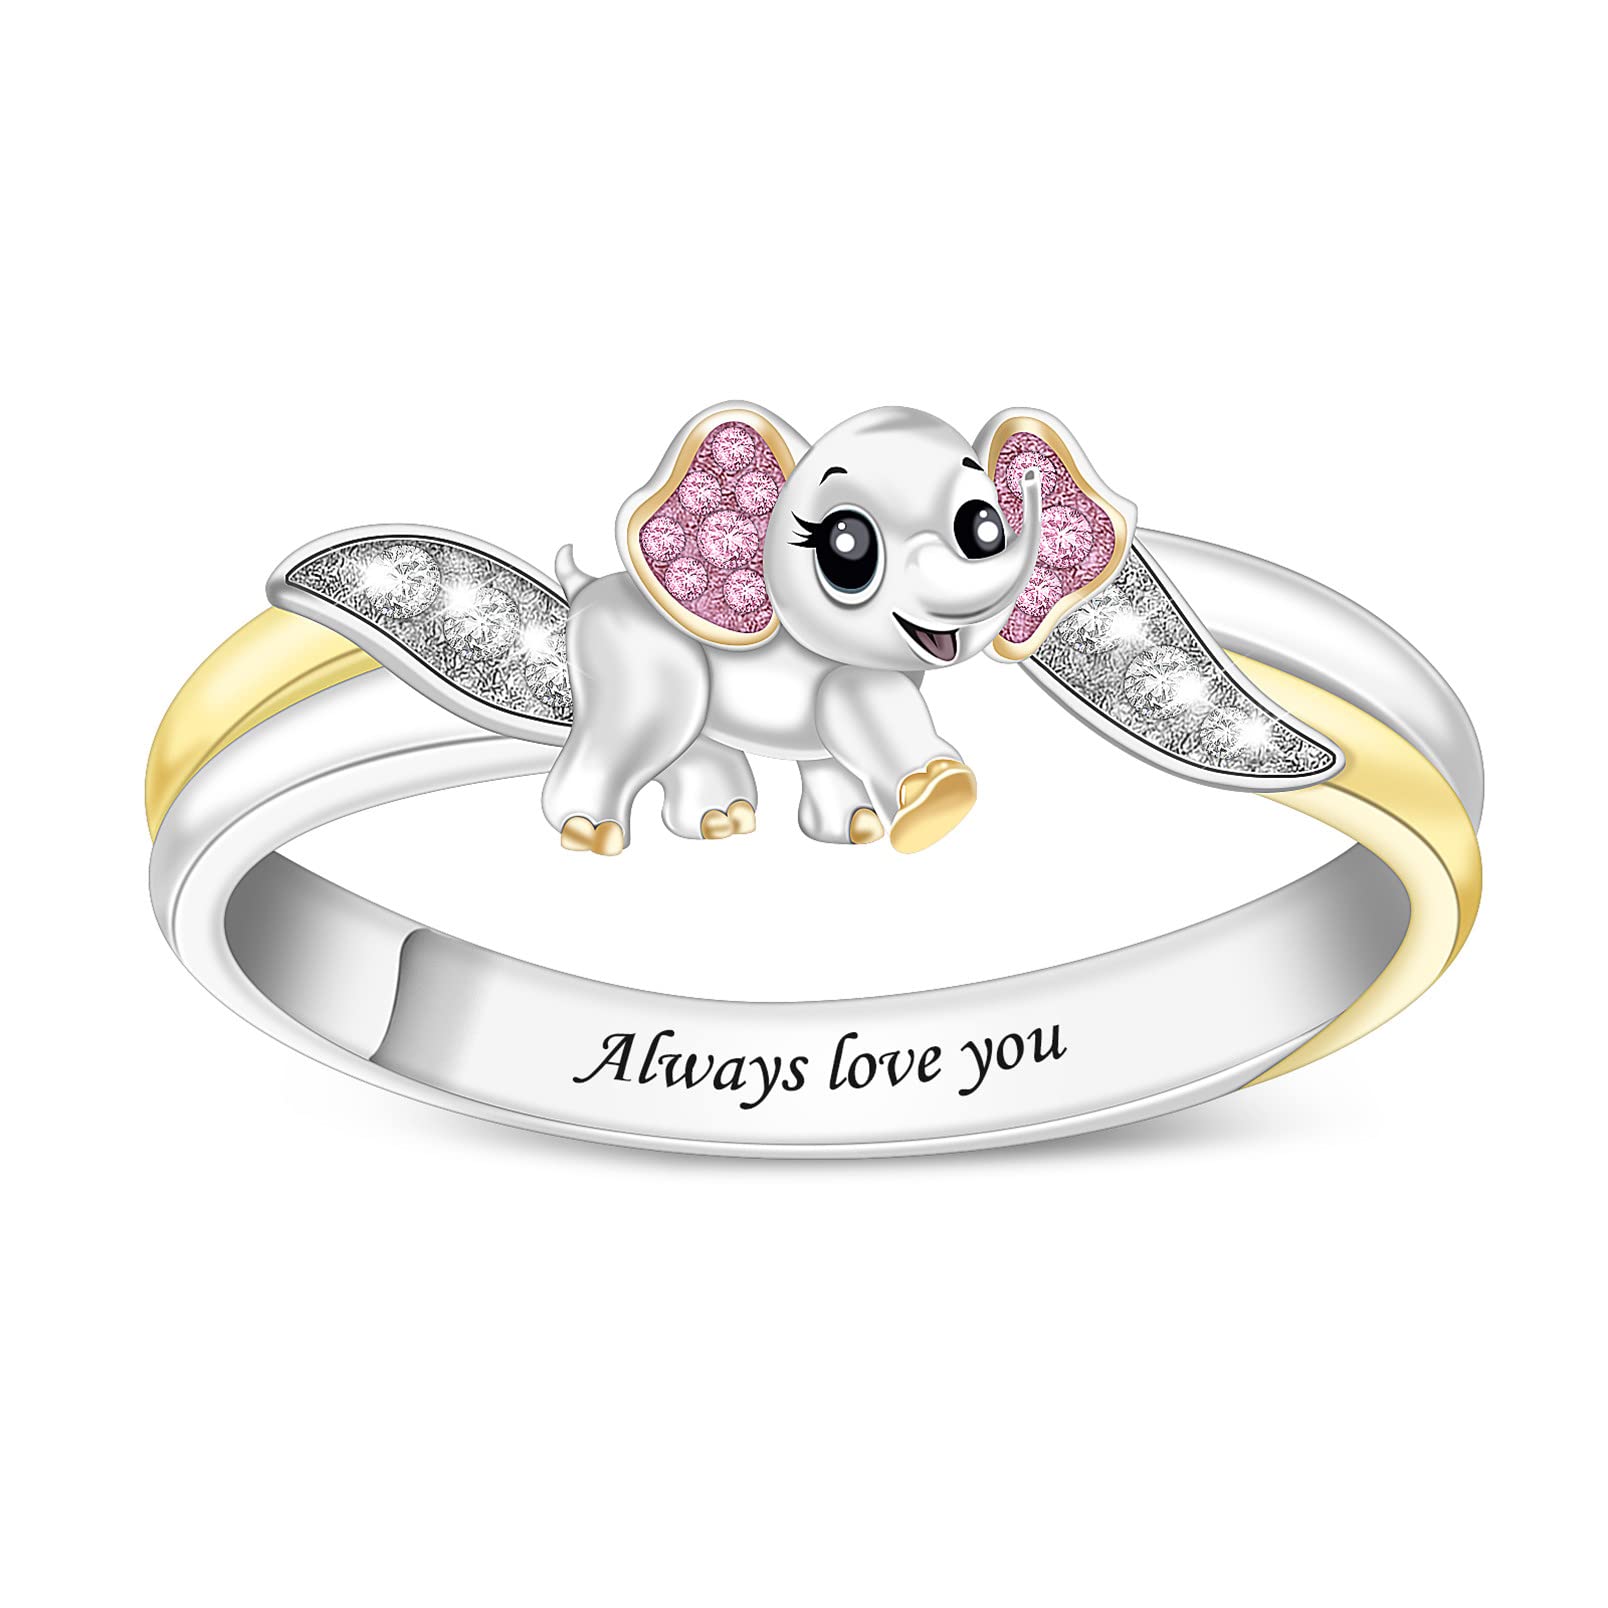 Personalized Baby Elephant Shaped Ring and Free Engraving.